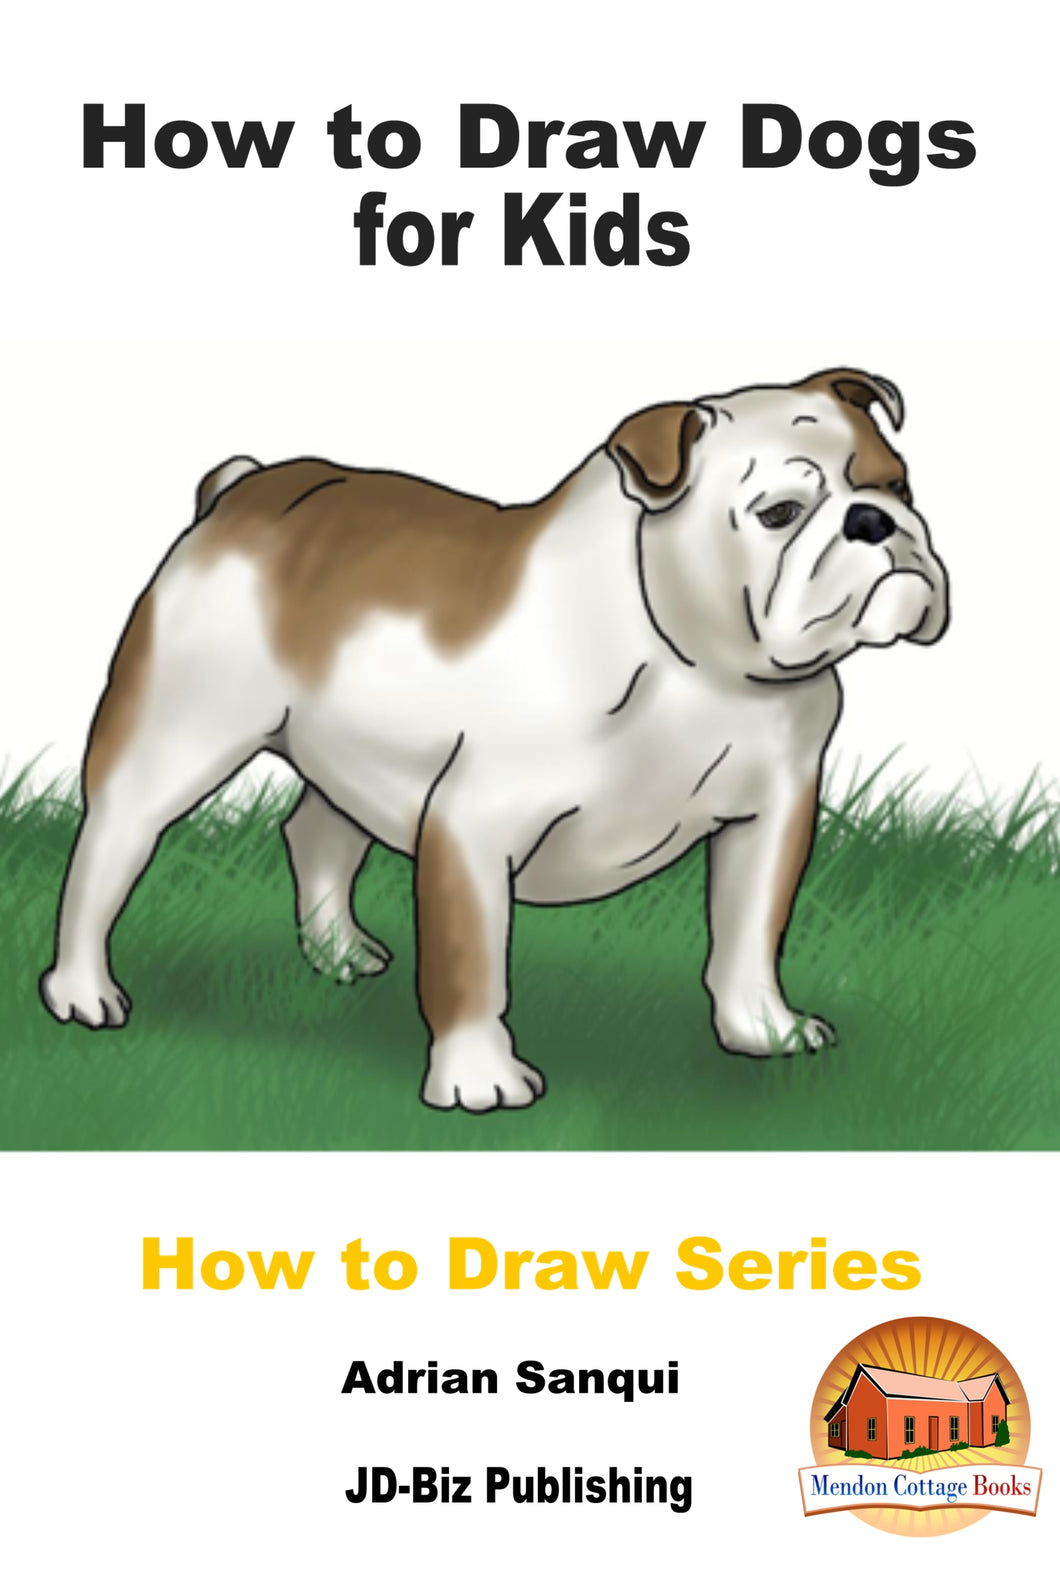 How to Draw Dogs for Kids